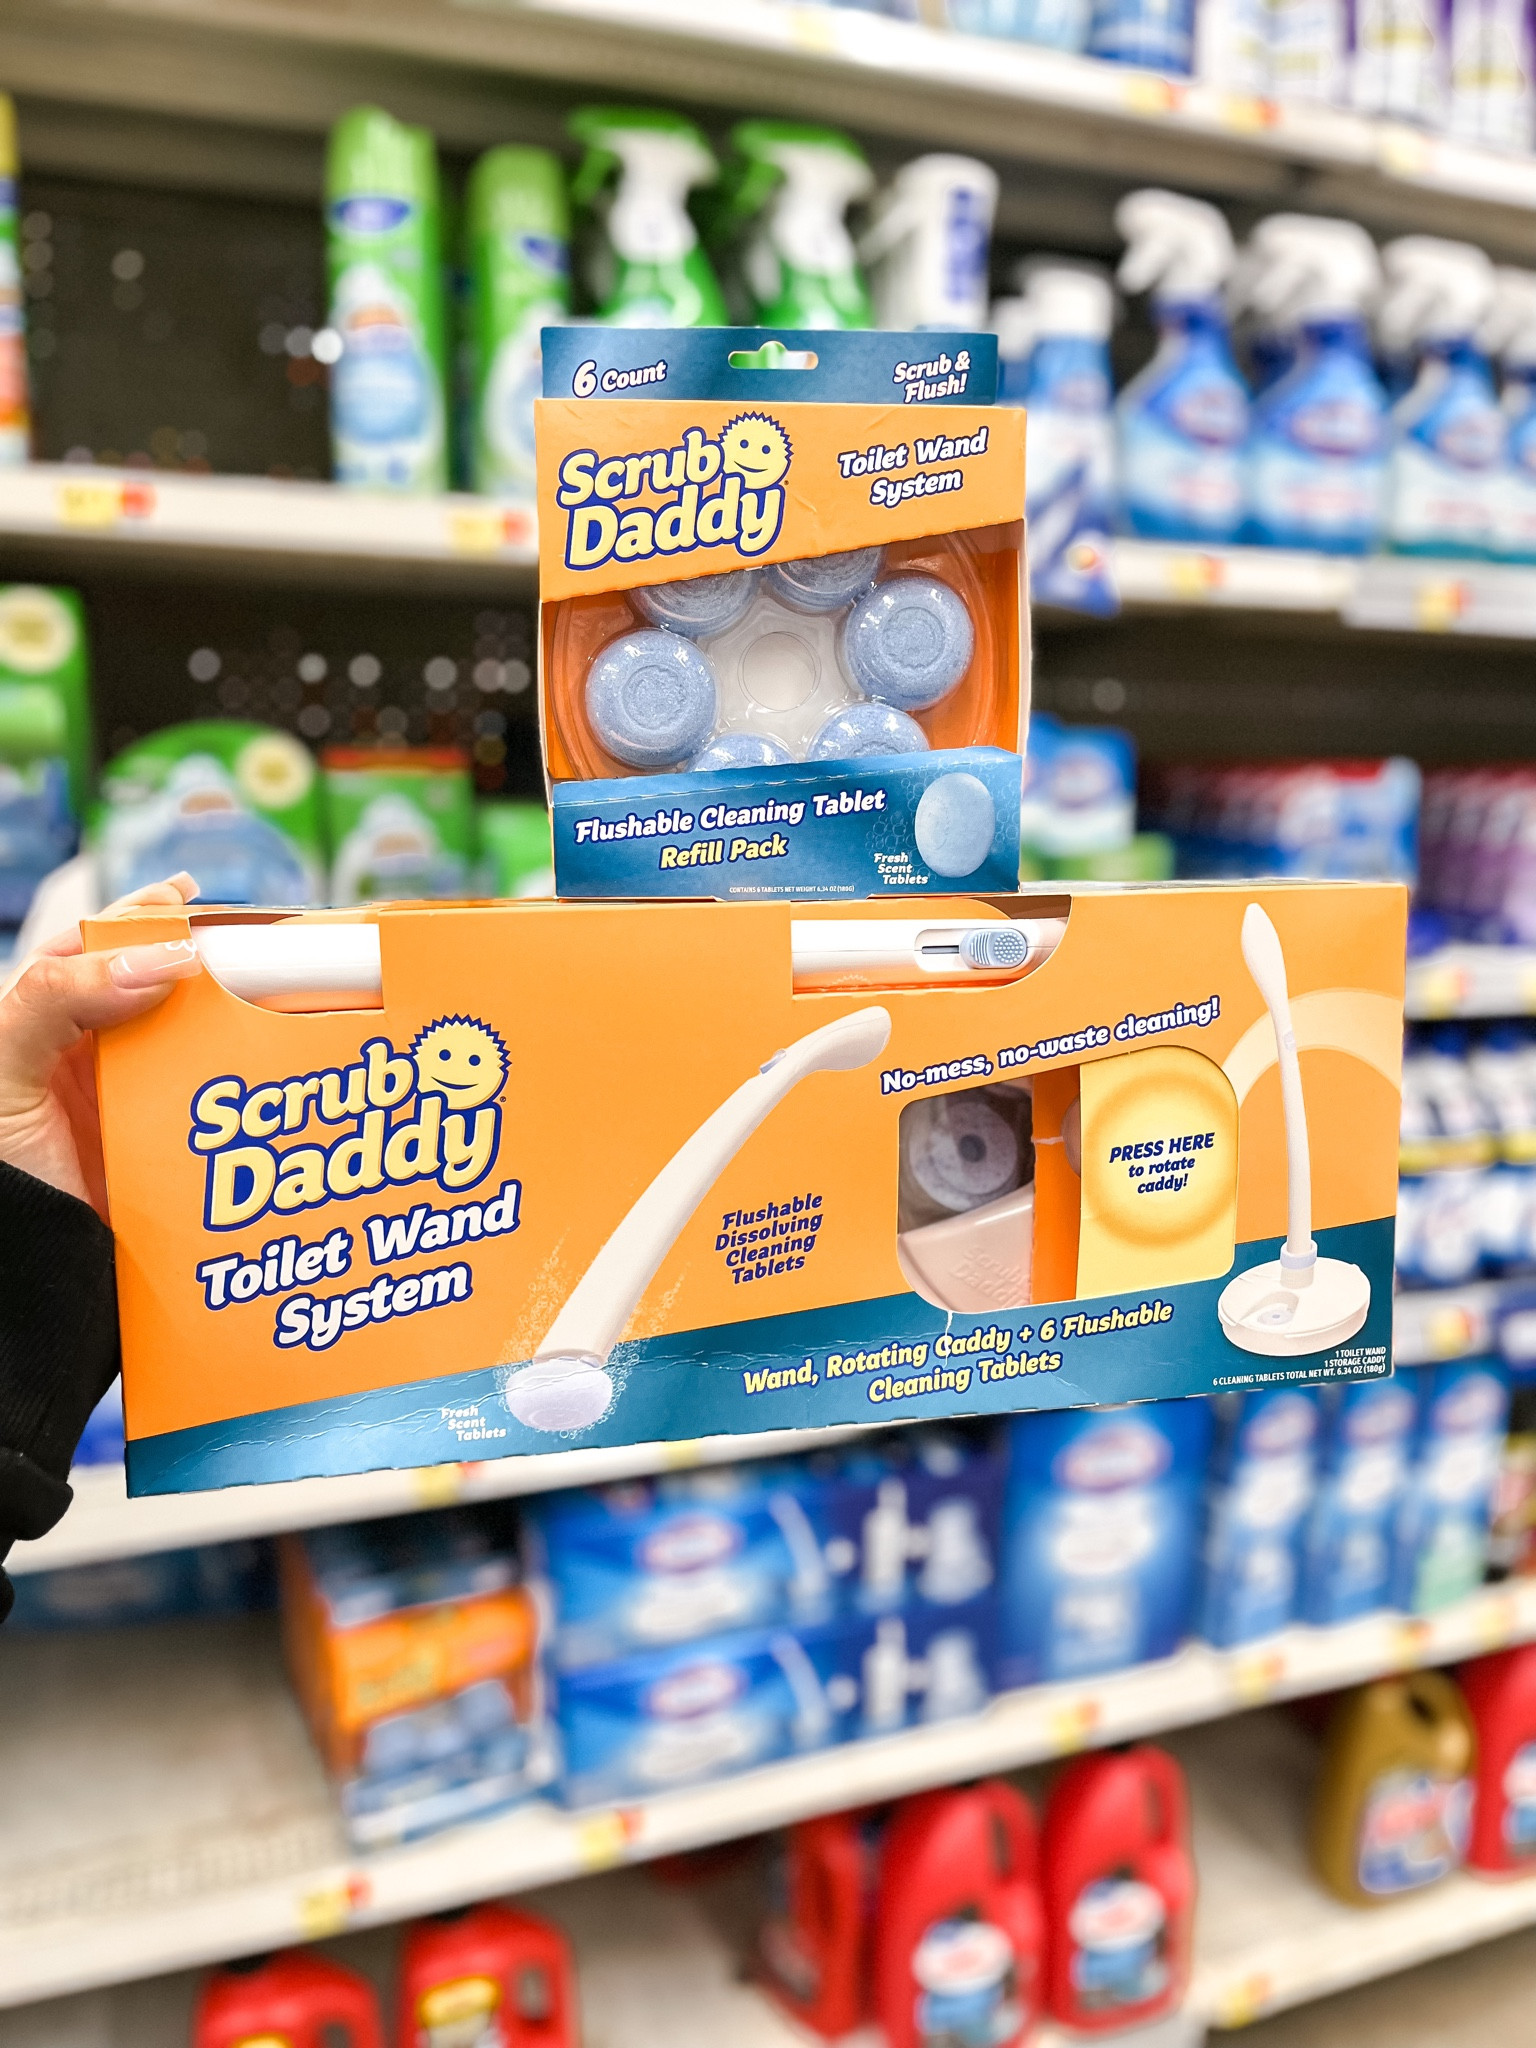 3) Scrub Daddy Flushable Cleaning Tablets Refill Packs For Wand System